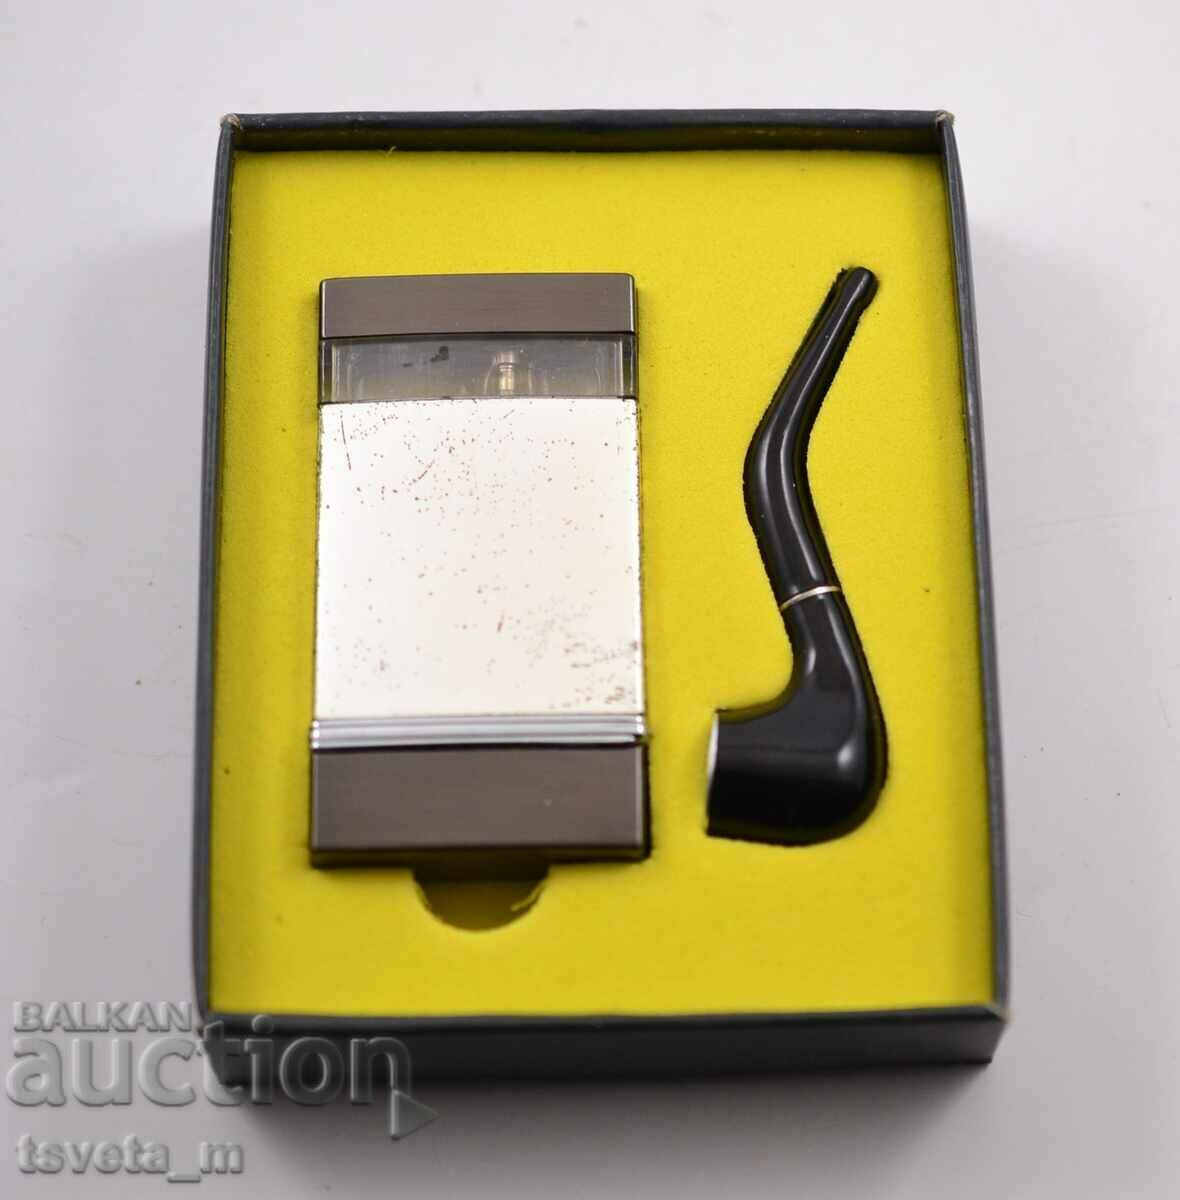 Gas windproof lighter and cigarette